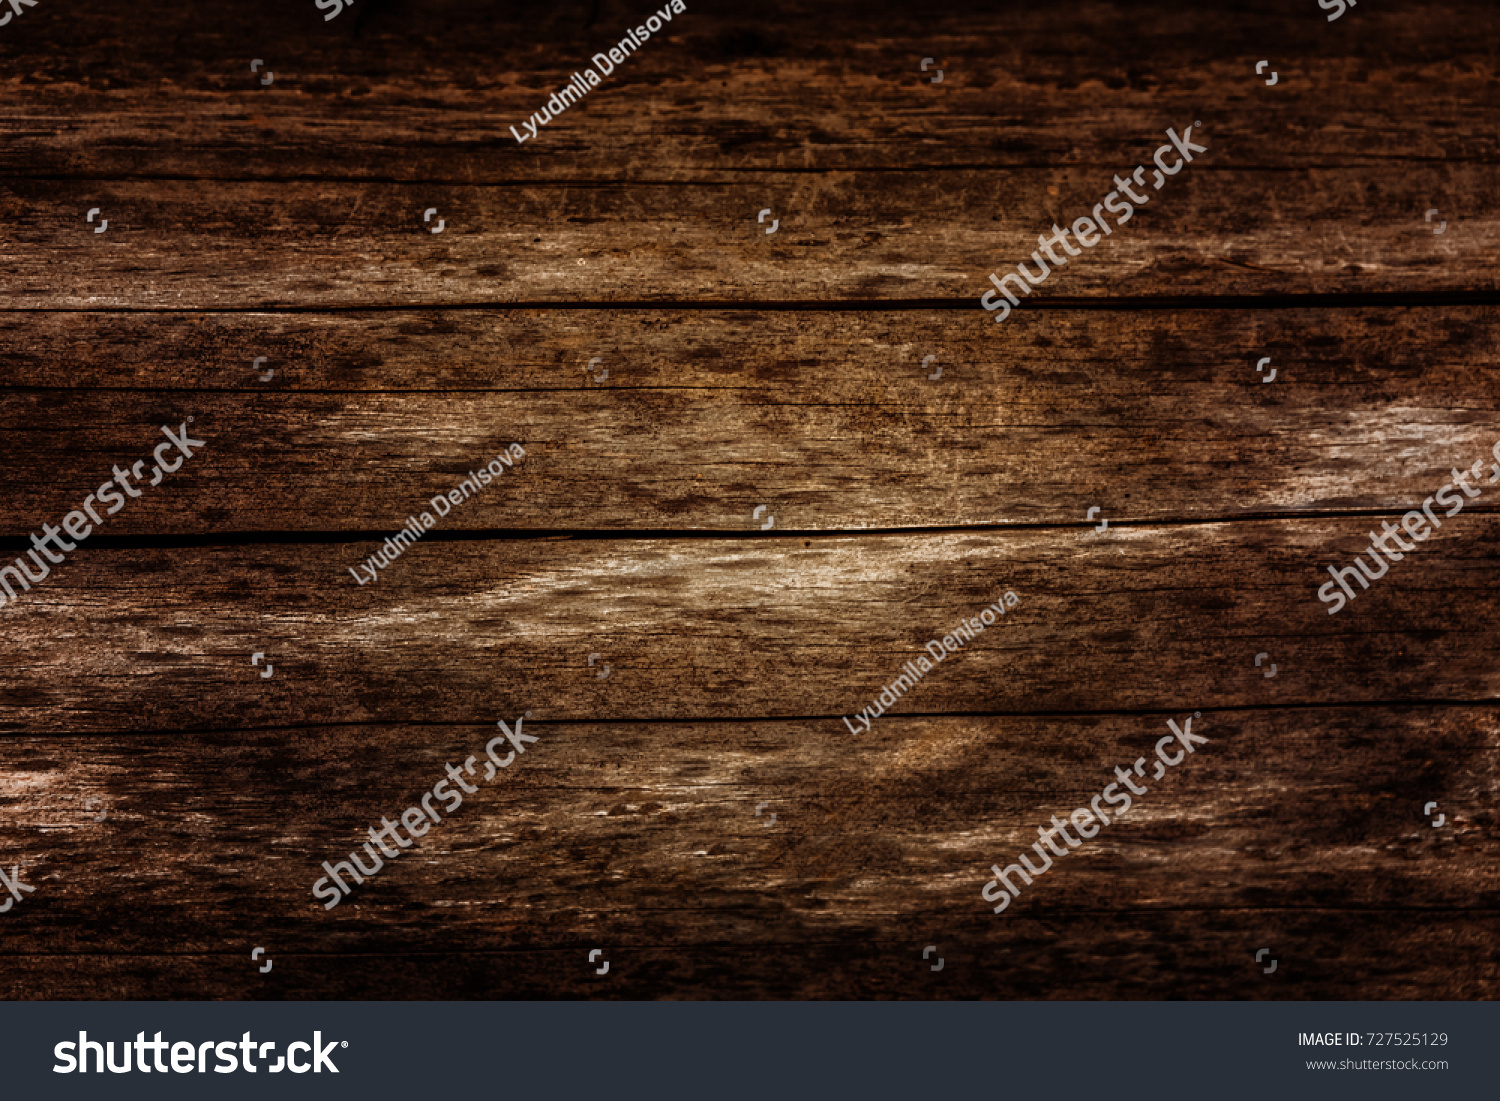 Texture of wood. Natural wooden background #727525129